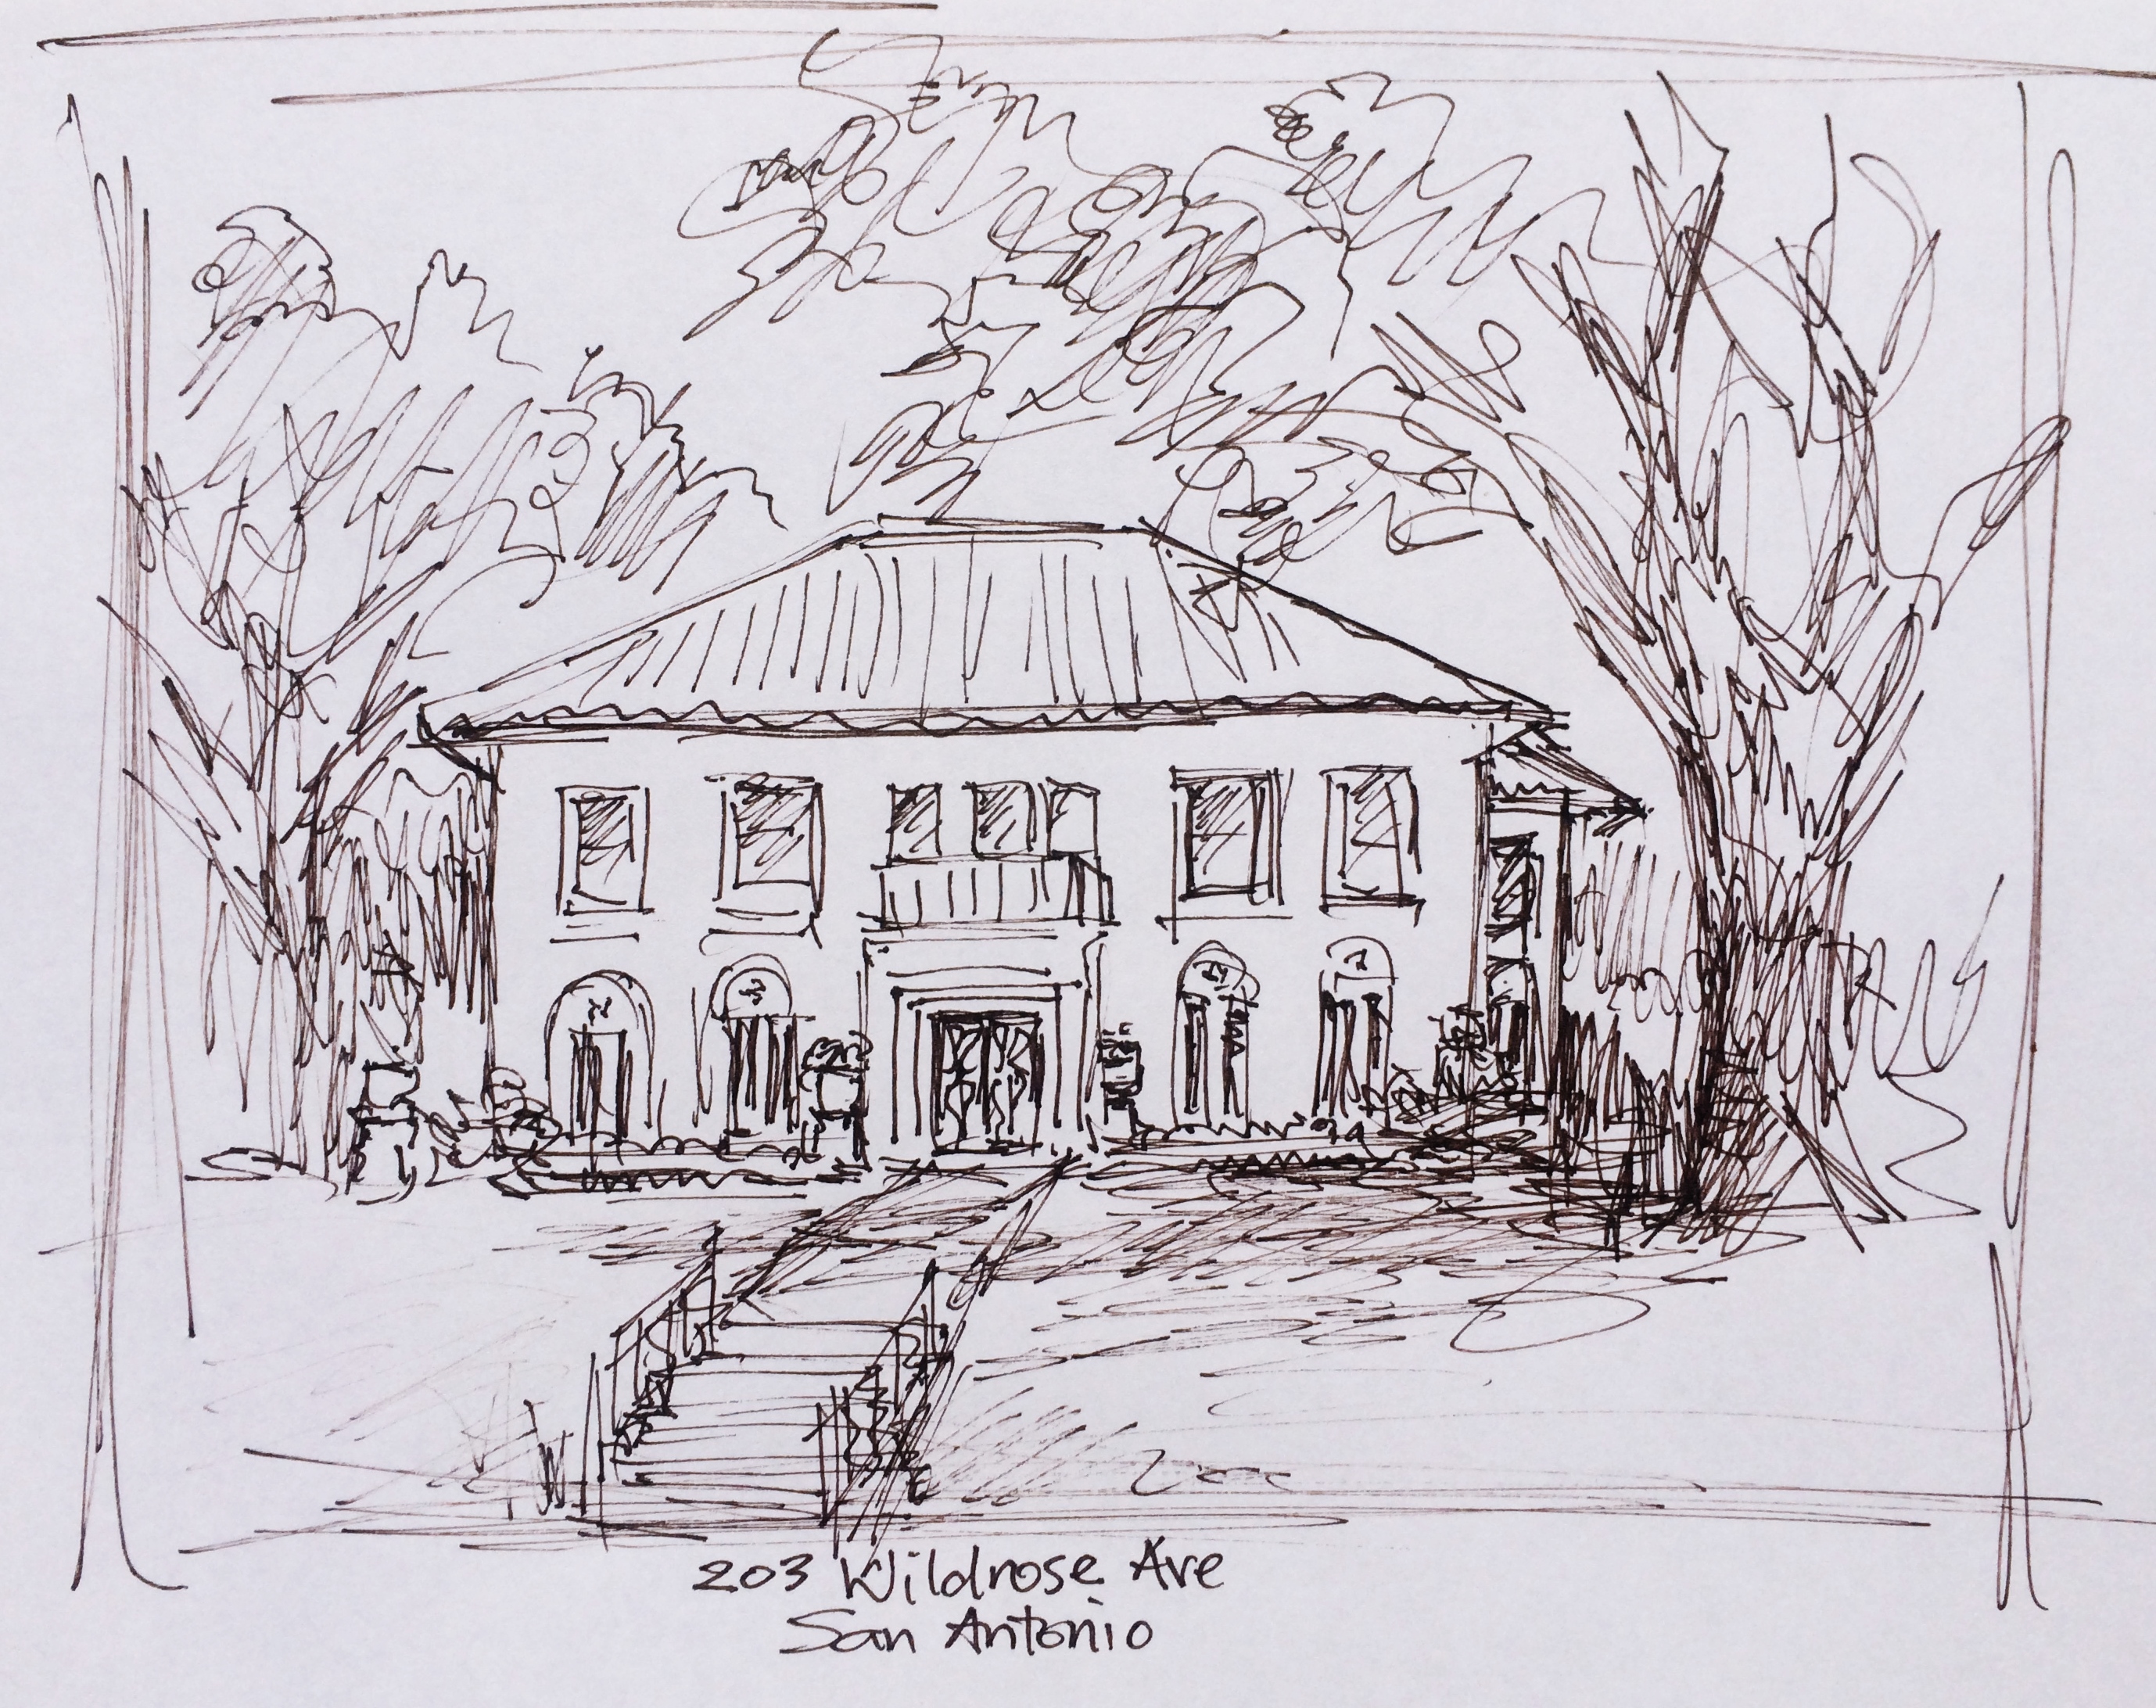 Rough preliminary sketch of home on Wildrose Ave, San Antonio by Leisa Collins